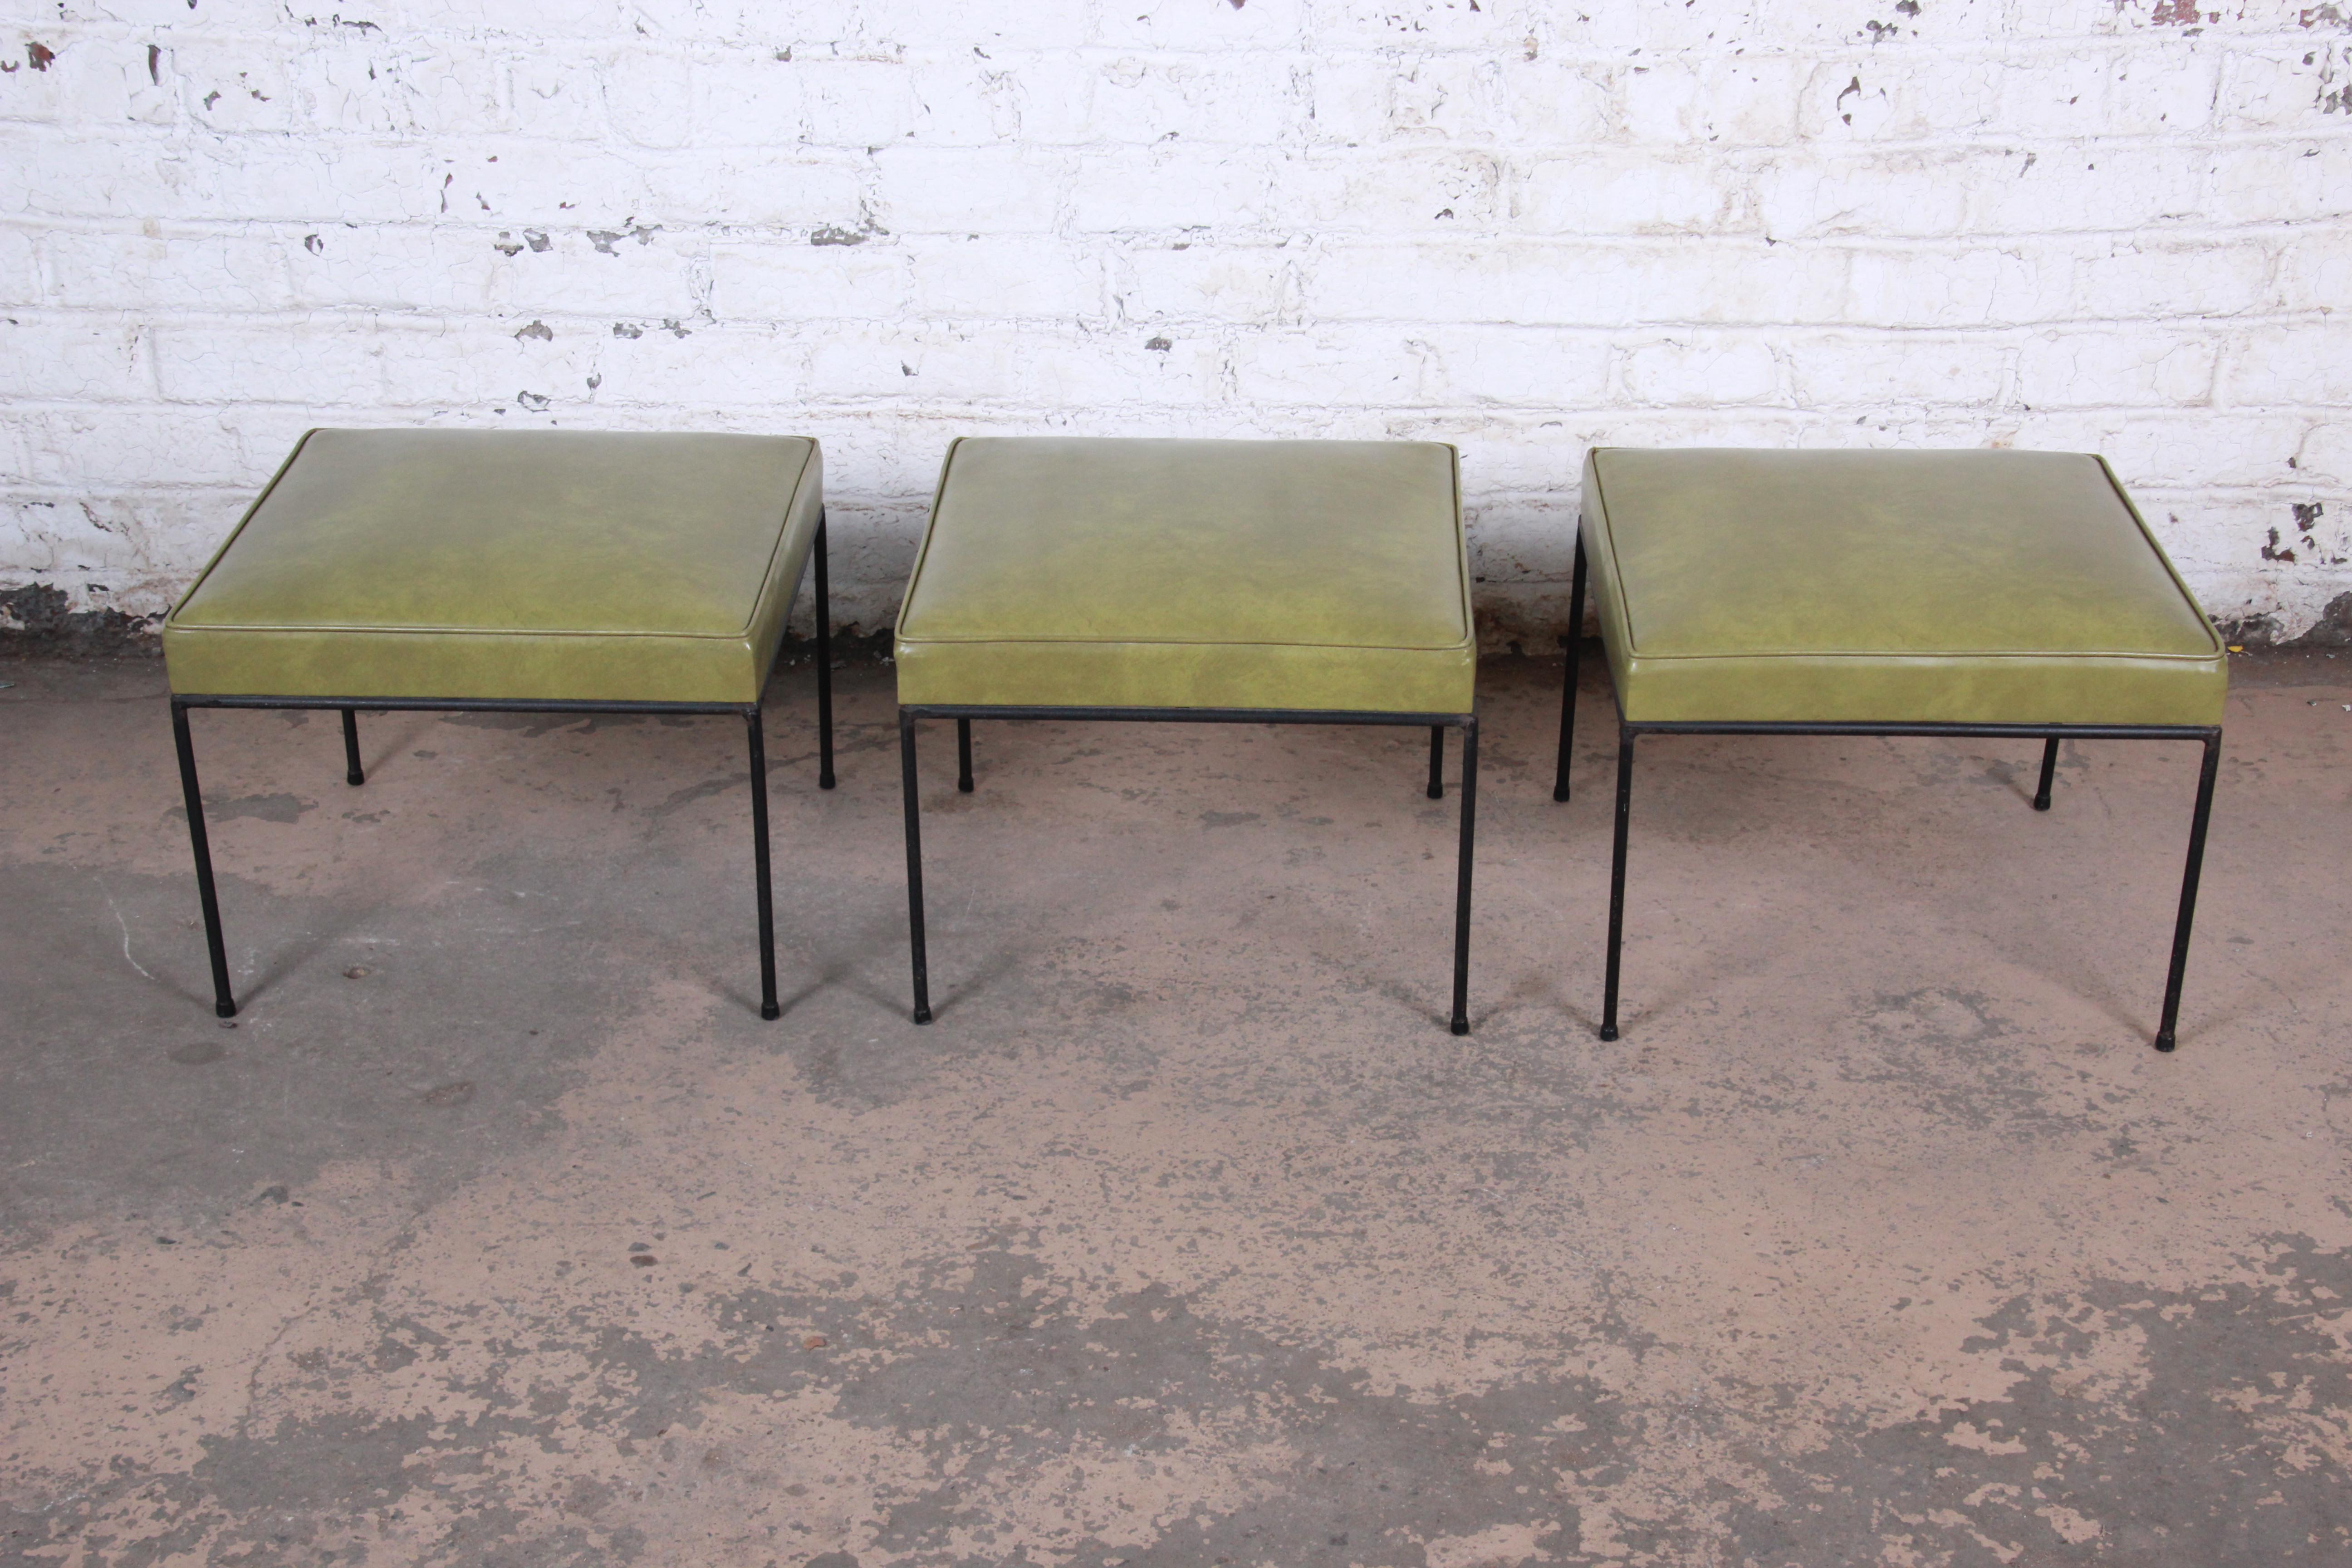 A rare set of three matching Mid-Century Modern stools or ottomans designed by Paul McCobb. The stools feature nice black iron legs with all feet glides still intact. The green vinyl upholstery is original. An excellent example of McCobb's